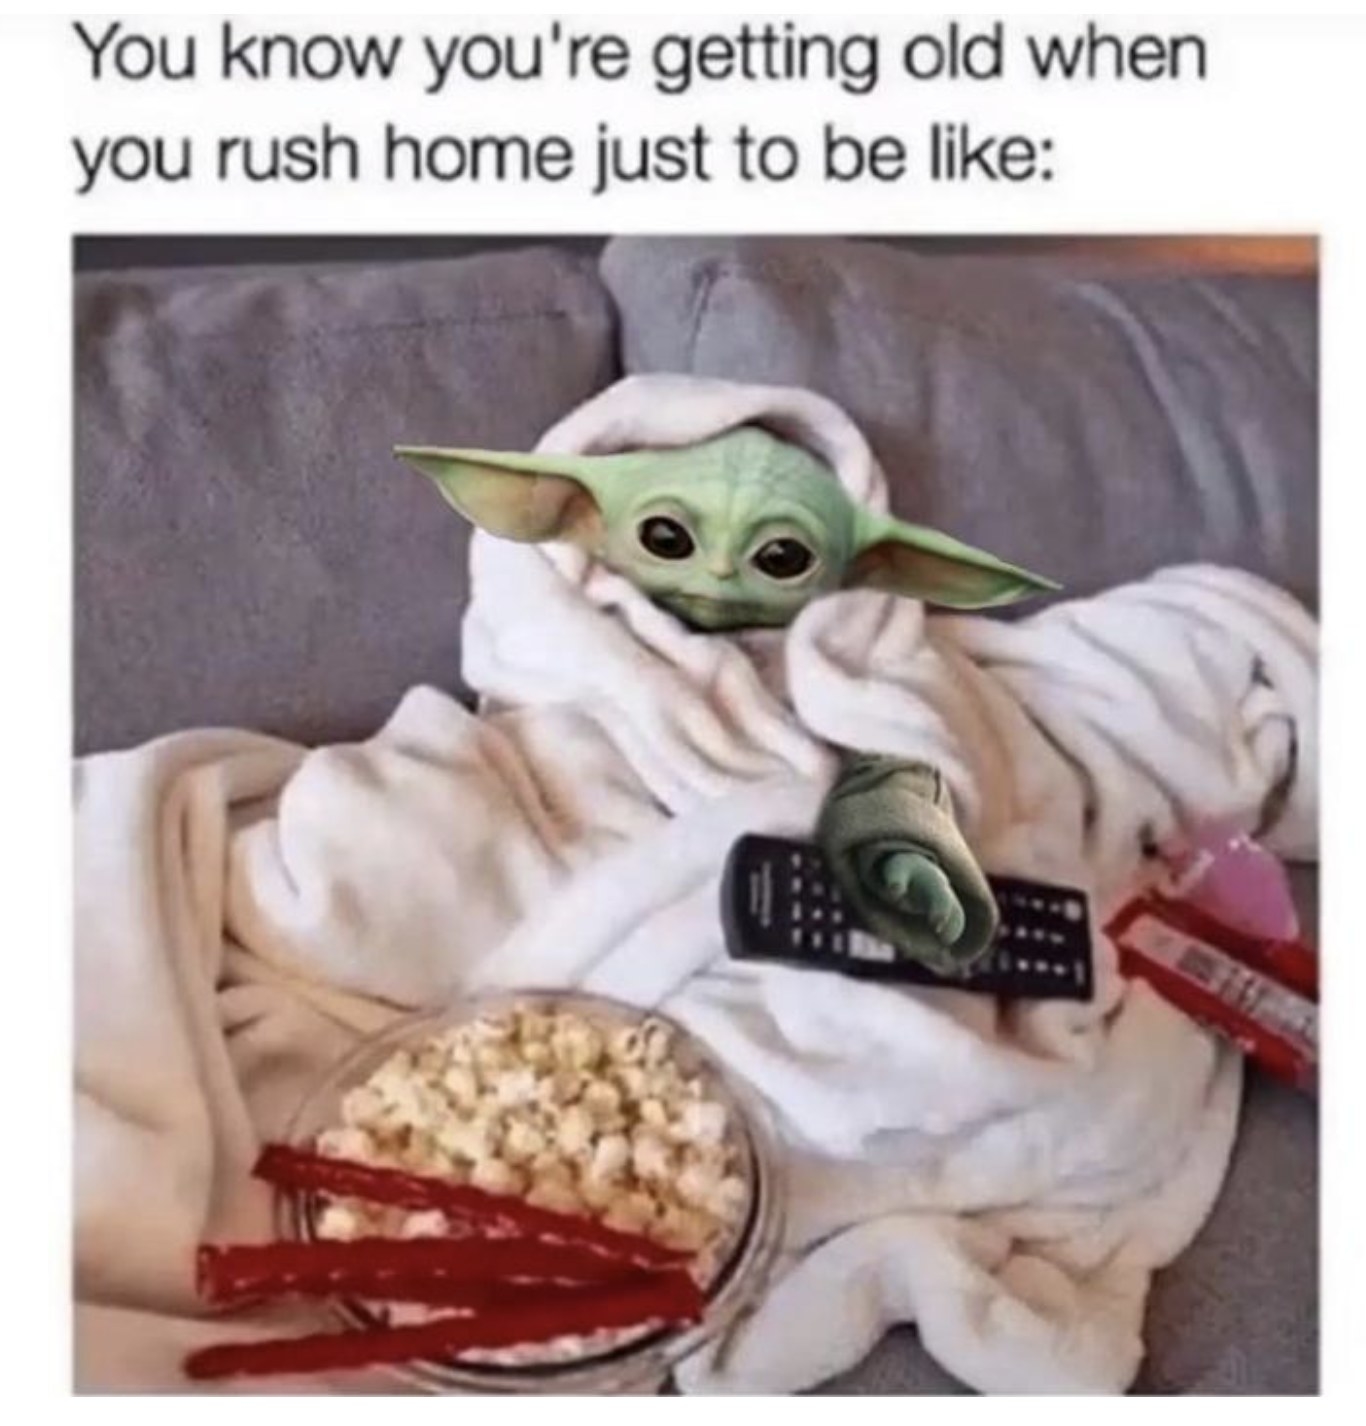 &quot;you know you&#x27;re getting old when you rush home just to be like:&quot; with picture of baby yoda on the couch with remote